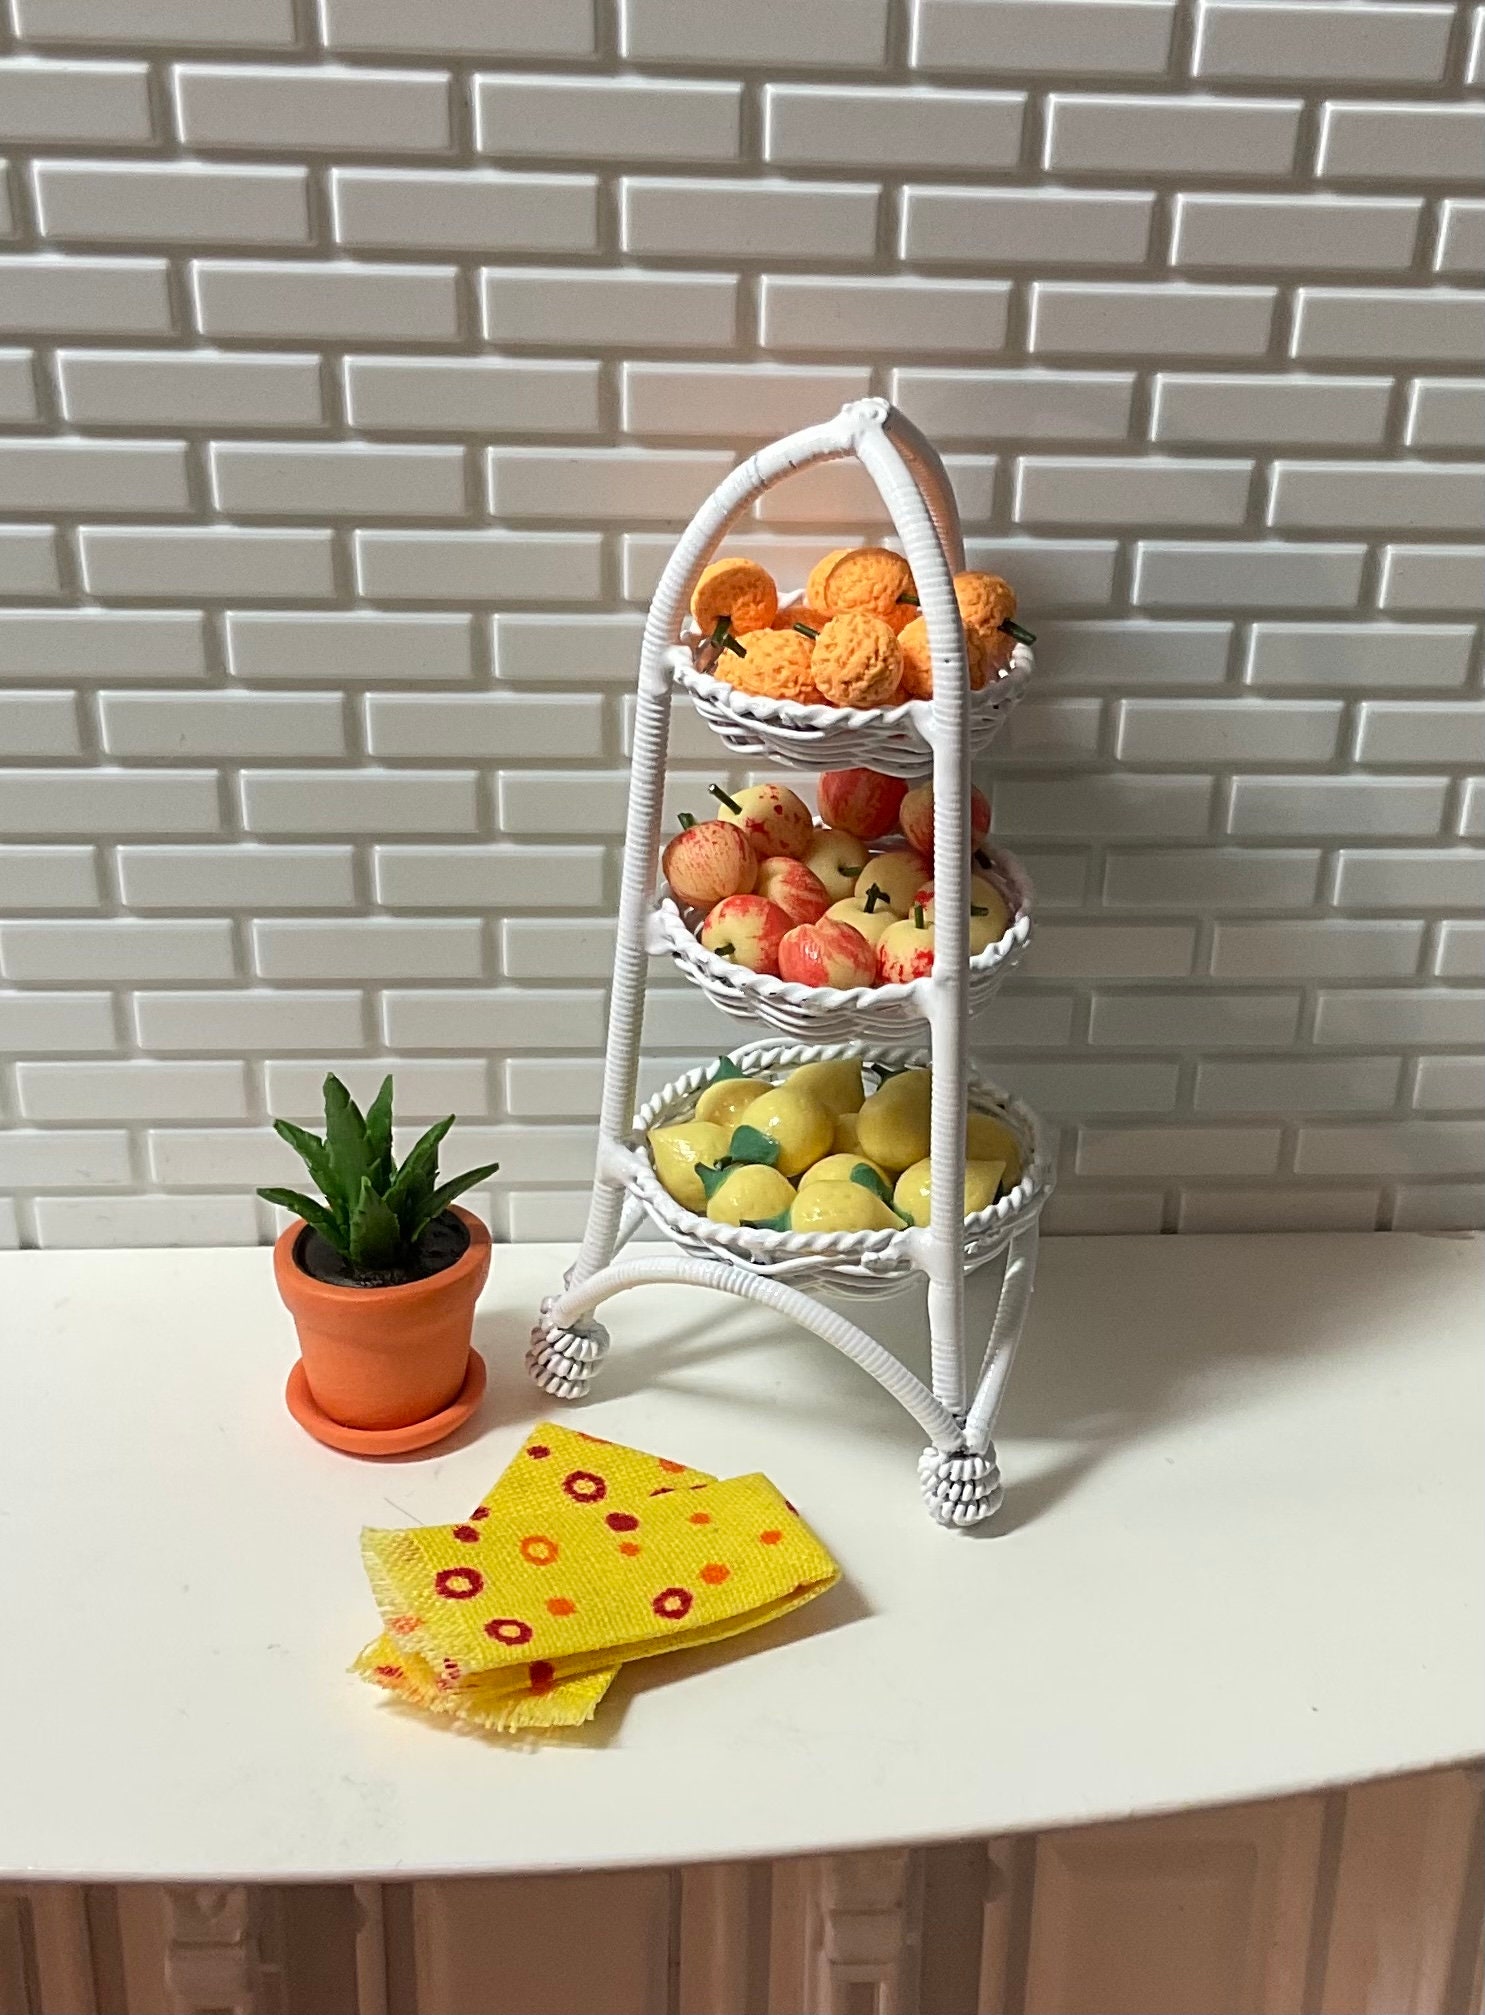 HFEHSKJ Footed Fruit Bowl with Draining Holes, Plastic Fruit Tray with  Base, Fruit Plate Centerpiece Dessert Display Stand for Kitchen Counter or